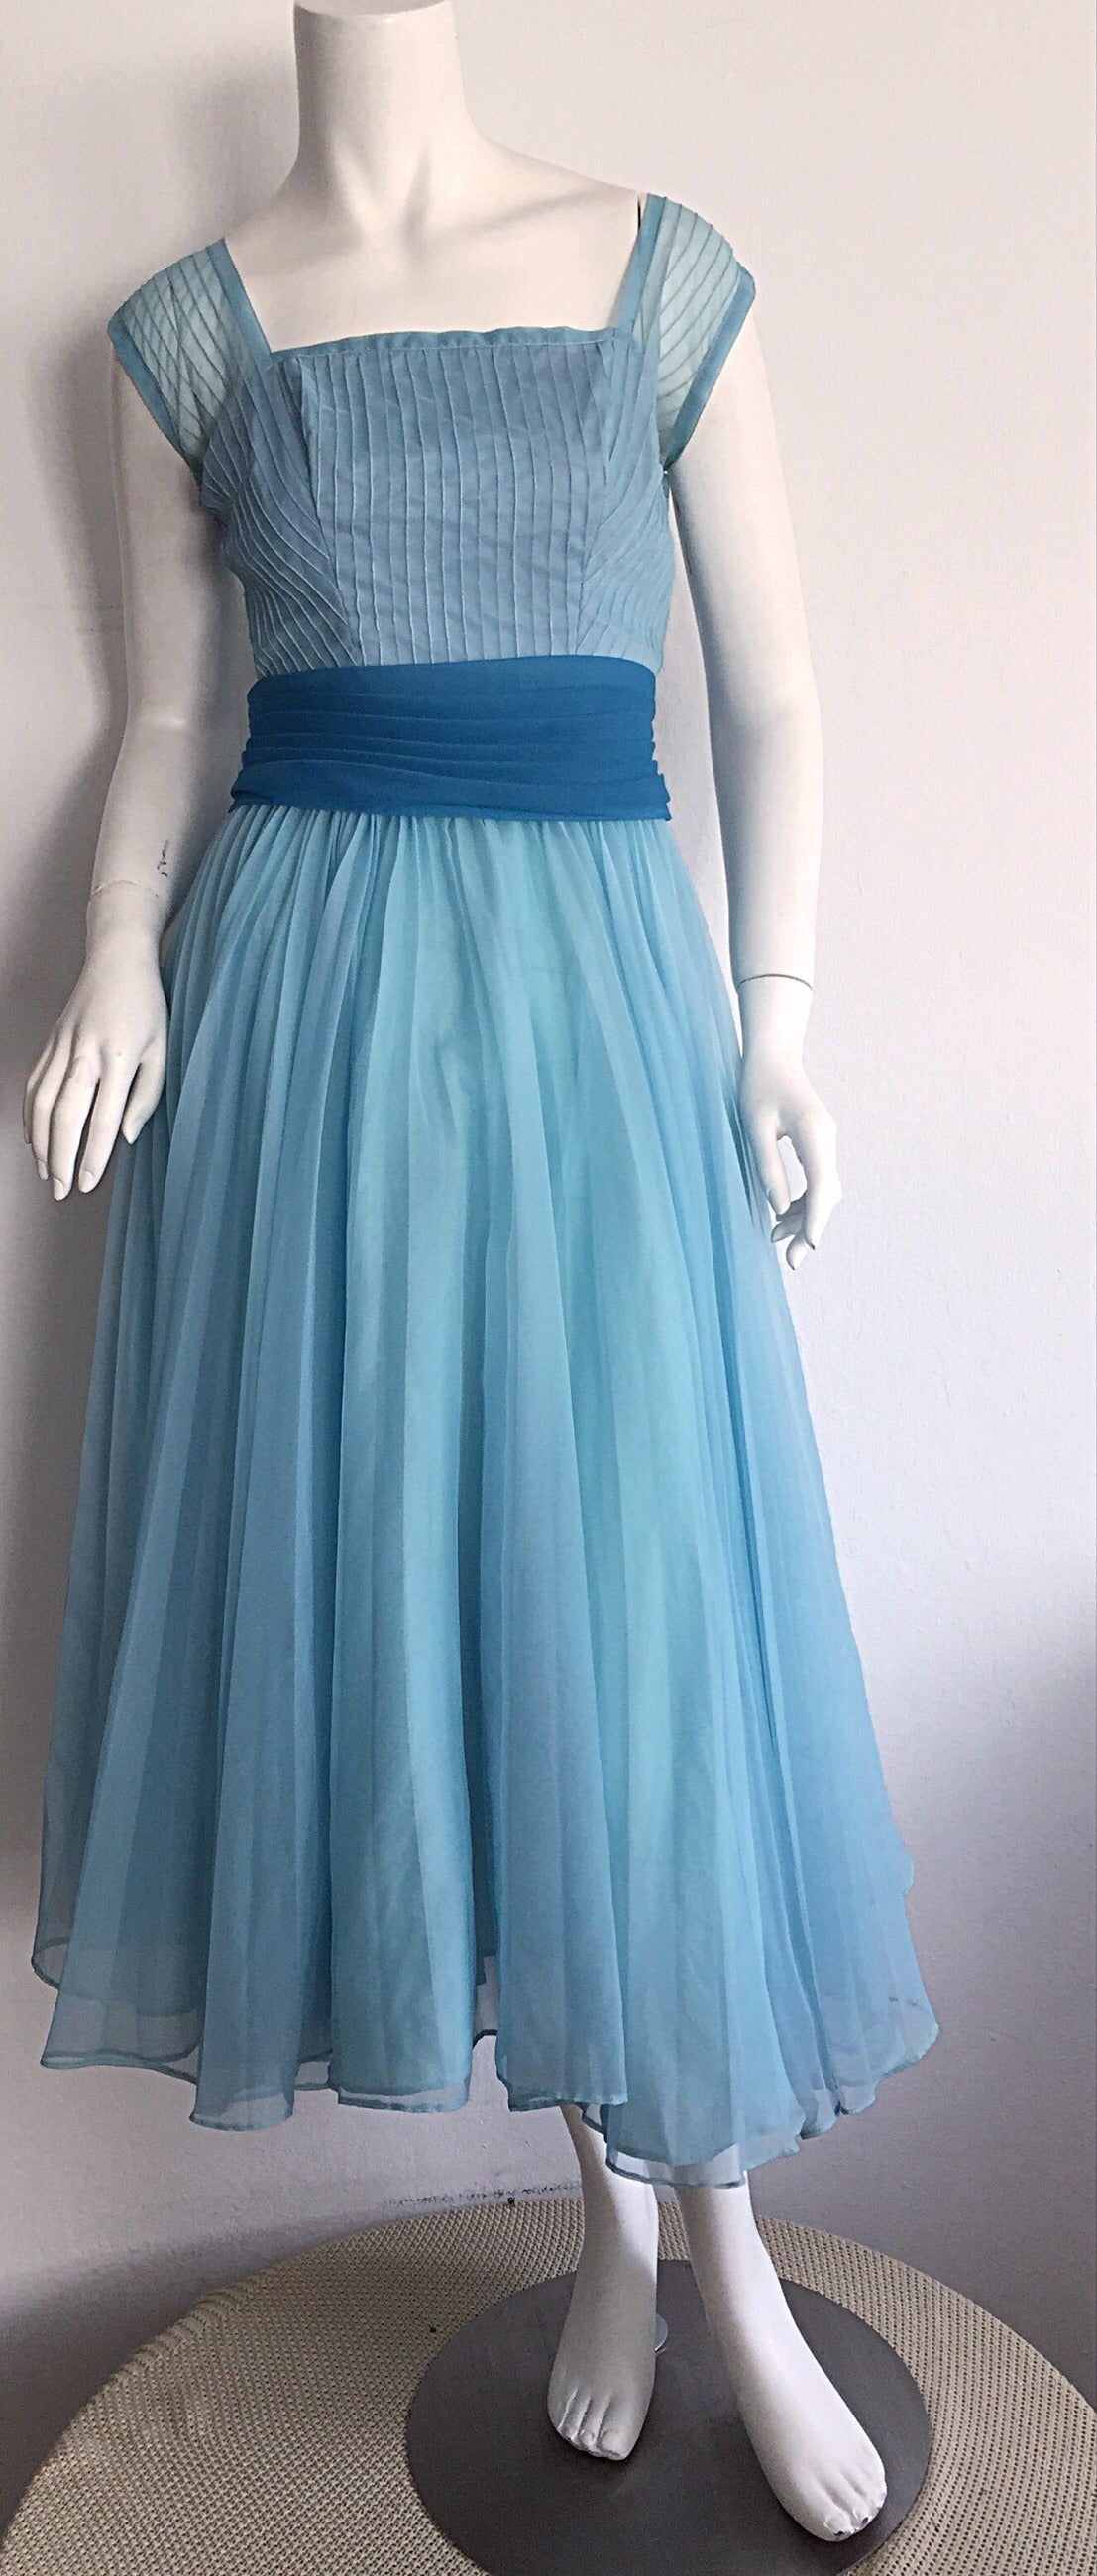 Such a pretty 1950s Fred Perlberg dress! Beautiful from the front, and the back! Intricate detail on the bodice, with an attached blue belt that snaps in the back. Can easily fit a crinoline under the skirt. Wonderful full skirt that looks great on